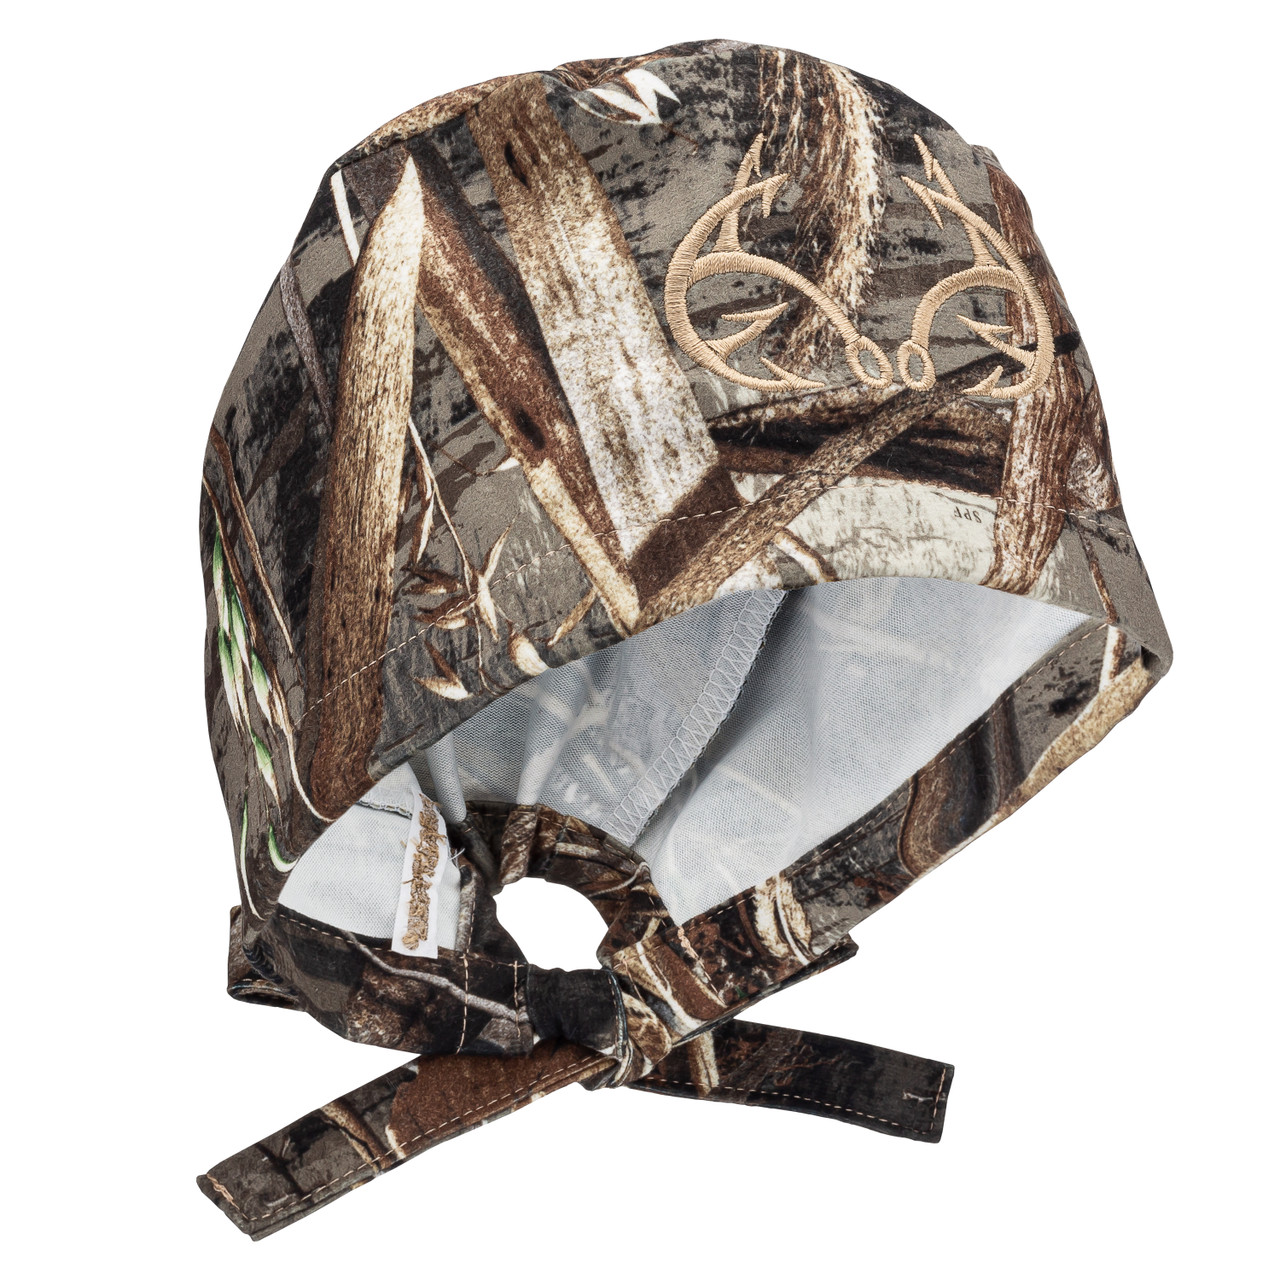 Realtree Camo Scrub Hat Officially Licensed with embroidered Fish